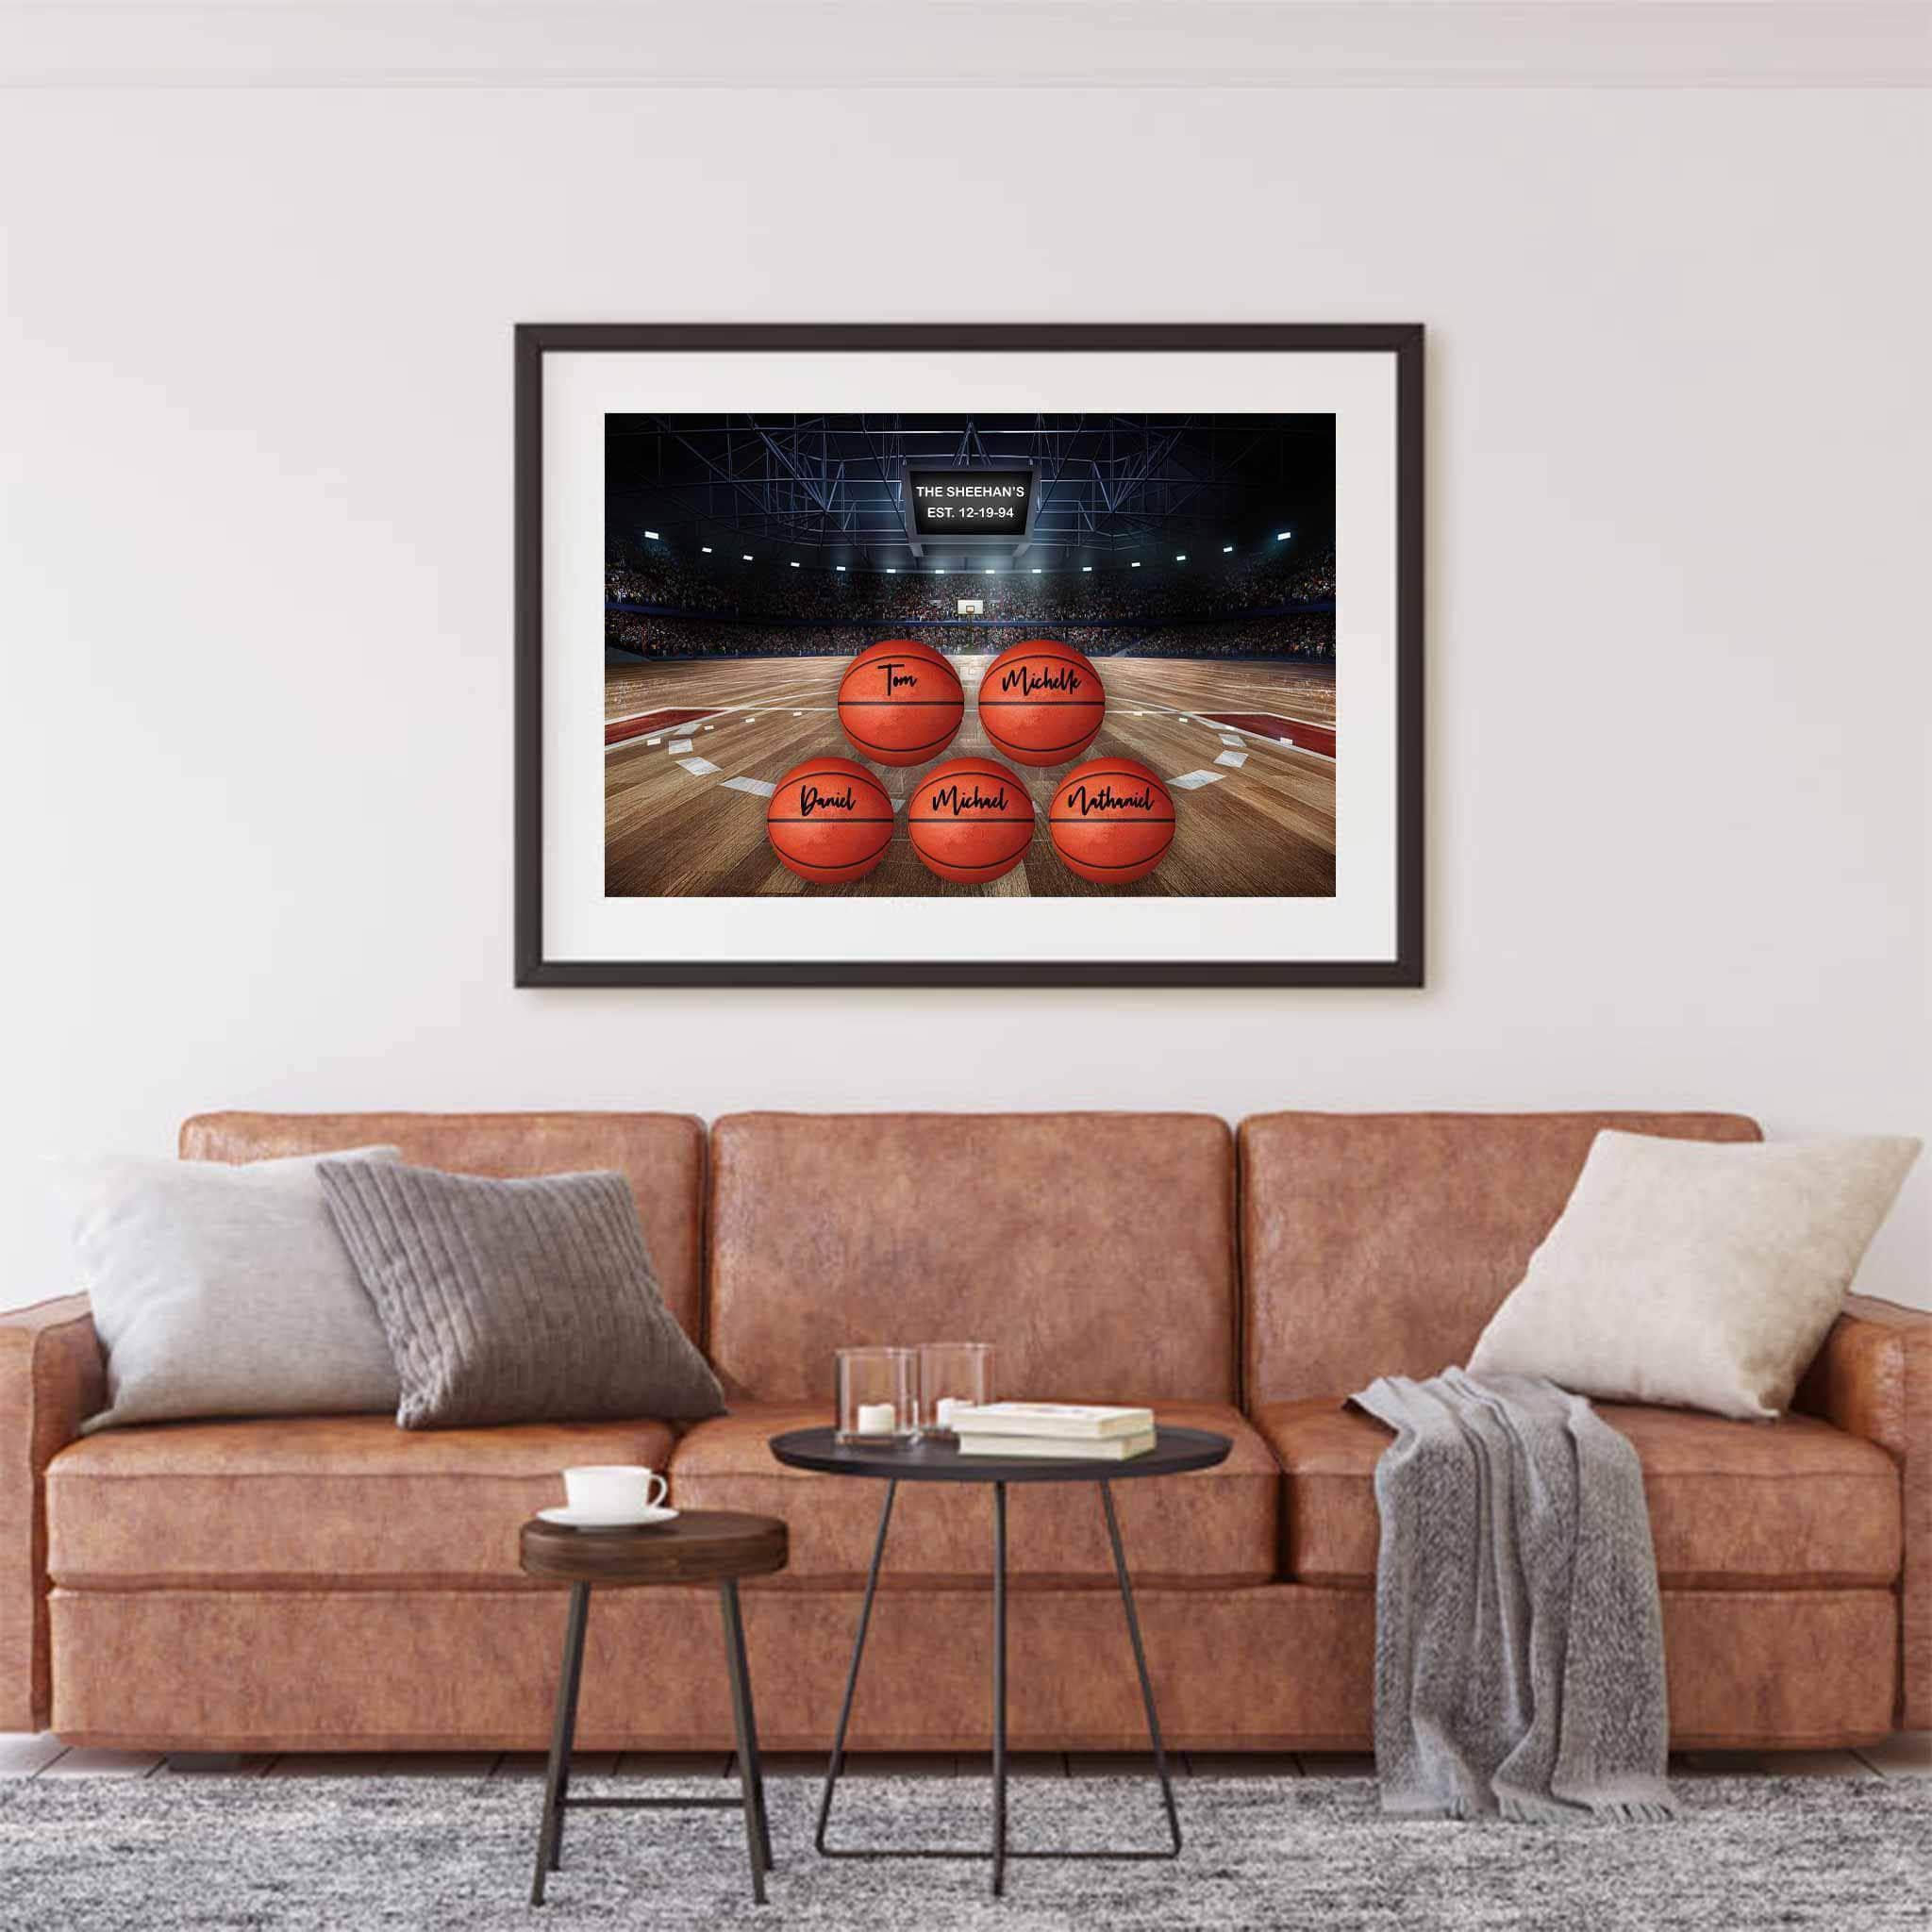 Basketball Arena V1 Multiple Names Personalized Basketballs And Scoreboard Sign Poster PrintCustomly Gifts